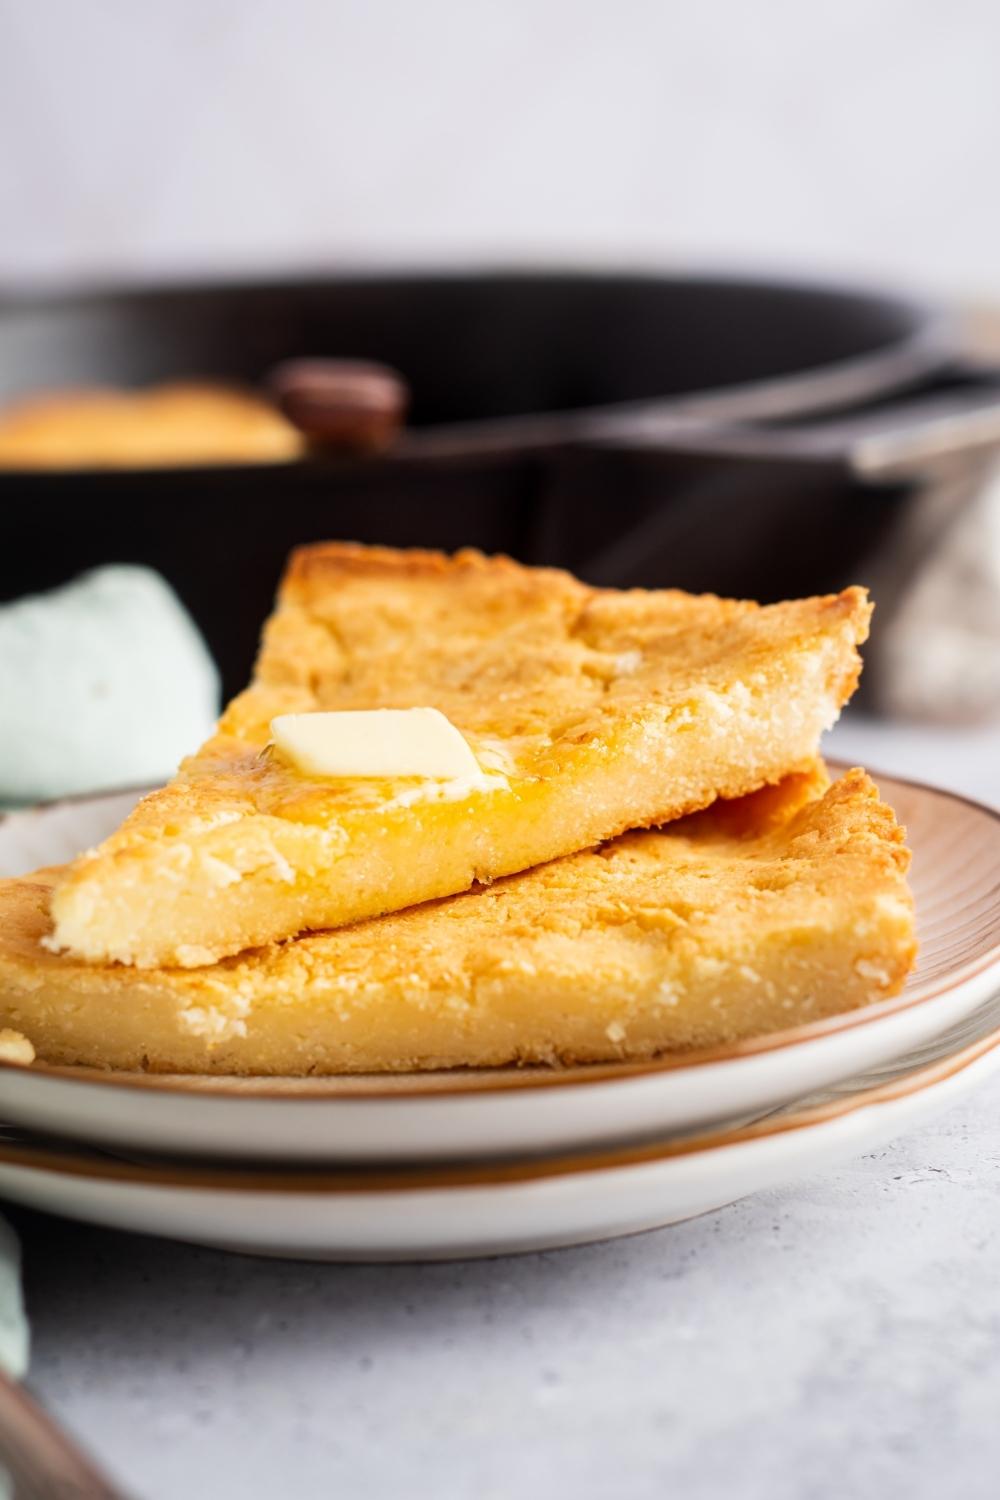 A triangle of corn bread on top of another triangle cornbread on to white plates.